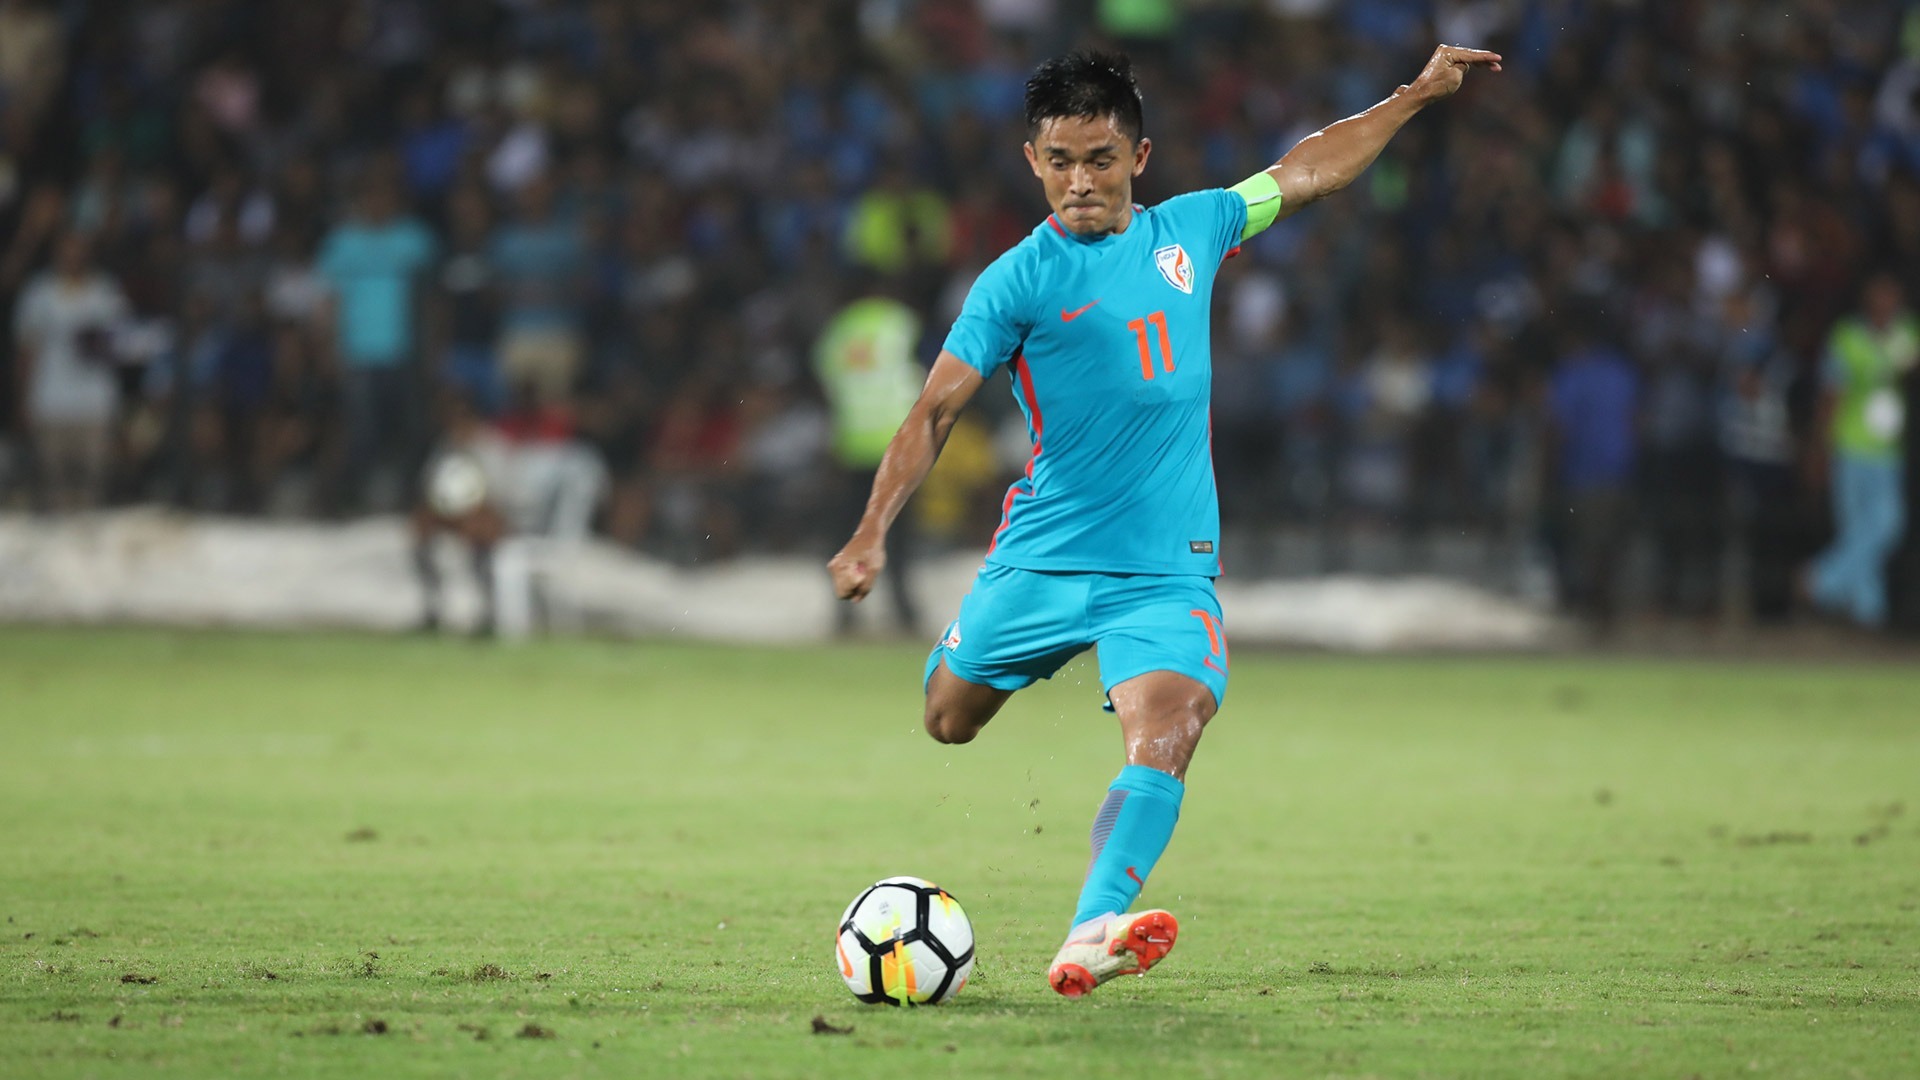 Chhetri surpasses Messi and enlists his name in top 10 highest interantional goal scorerlist - SportzPoint